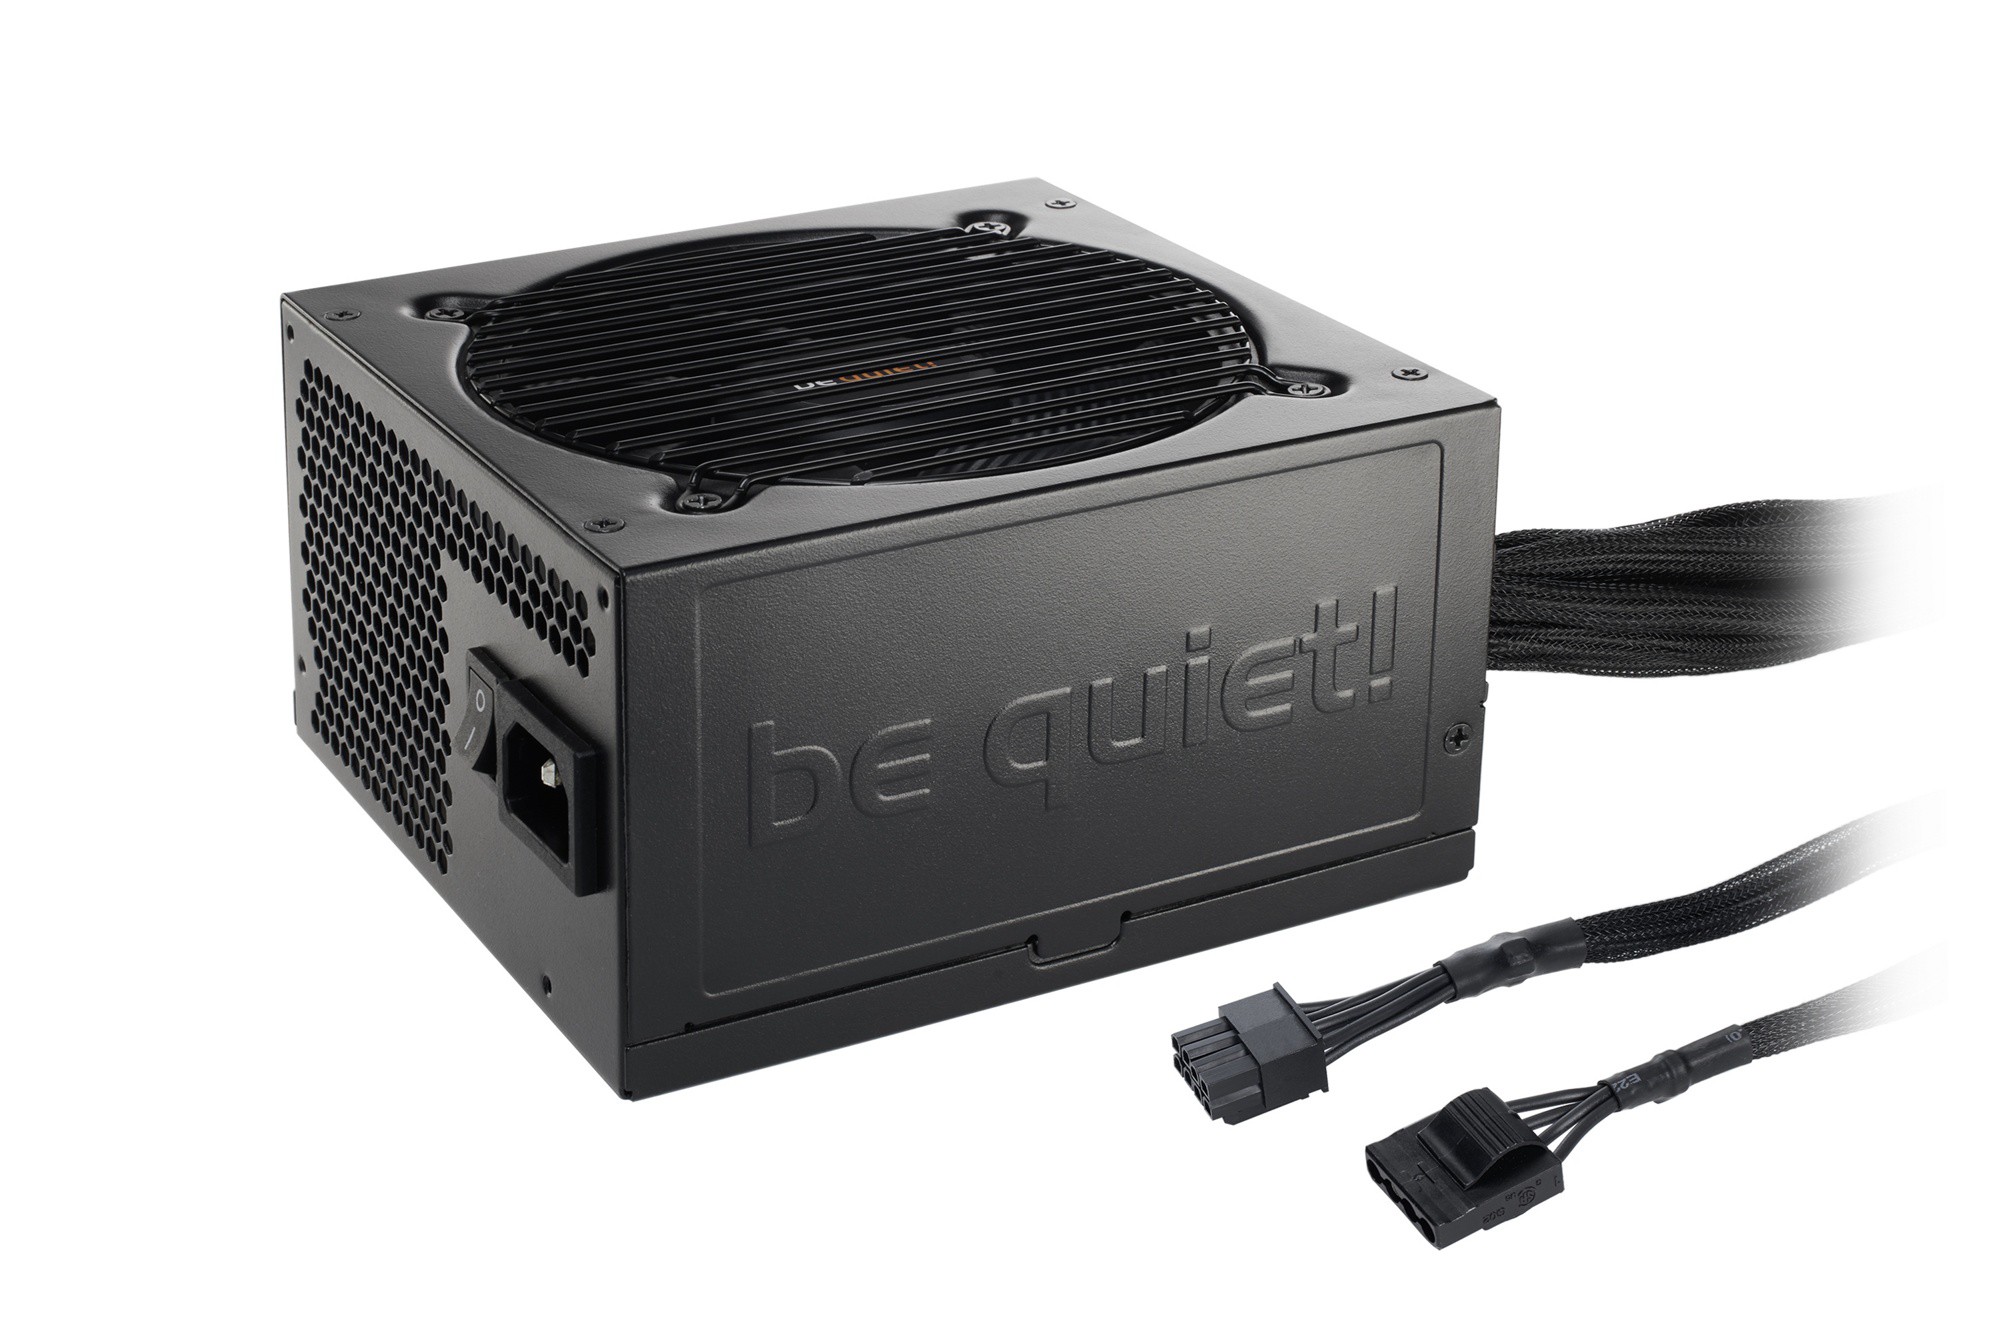   500W be quiet! Pure Power 11 (BN293)